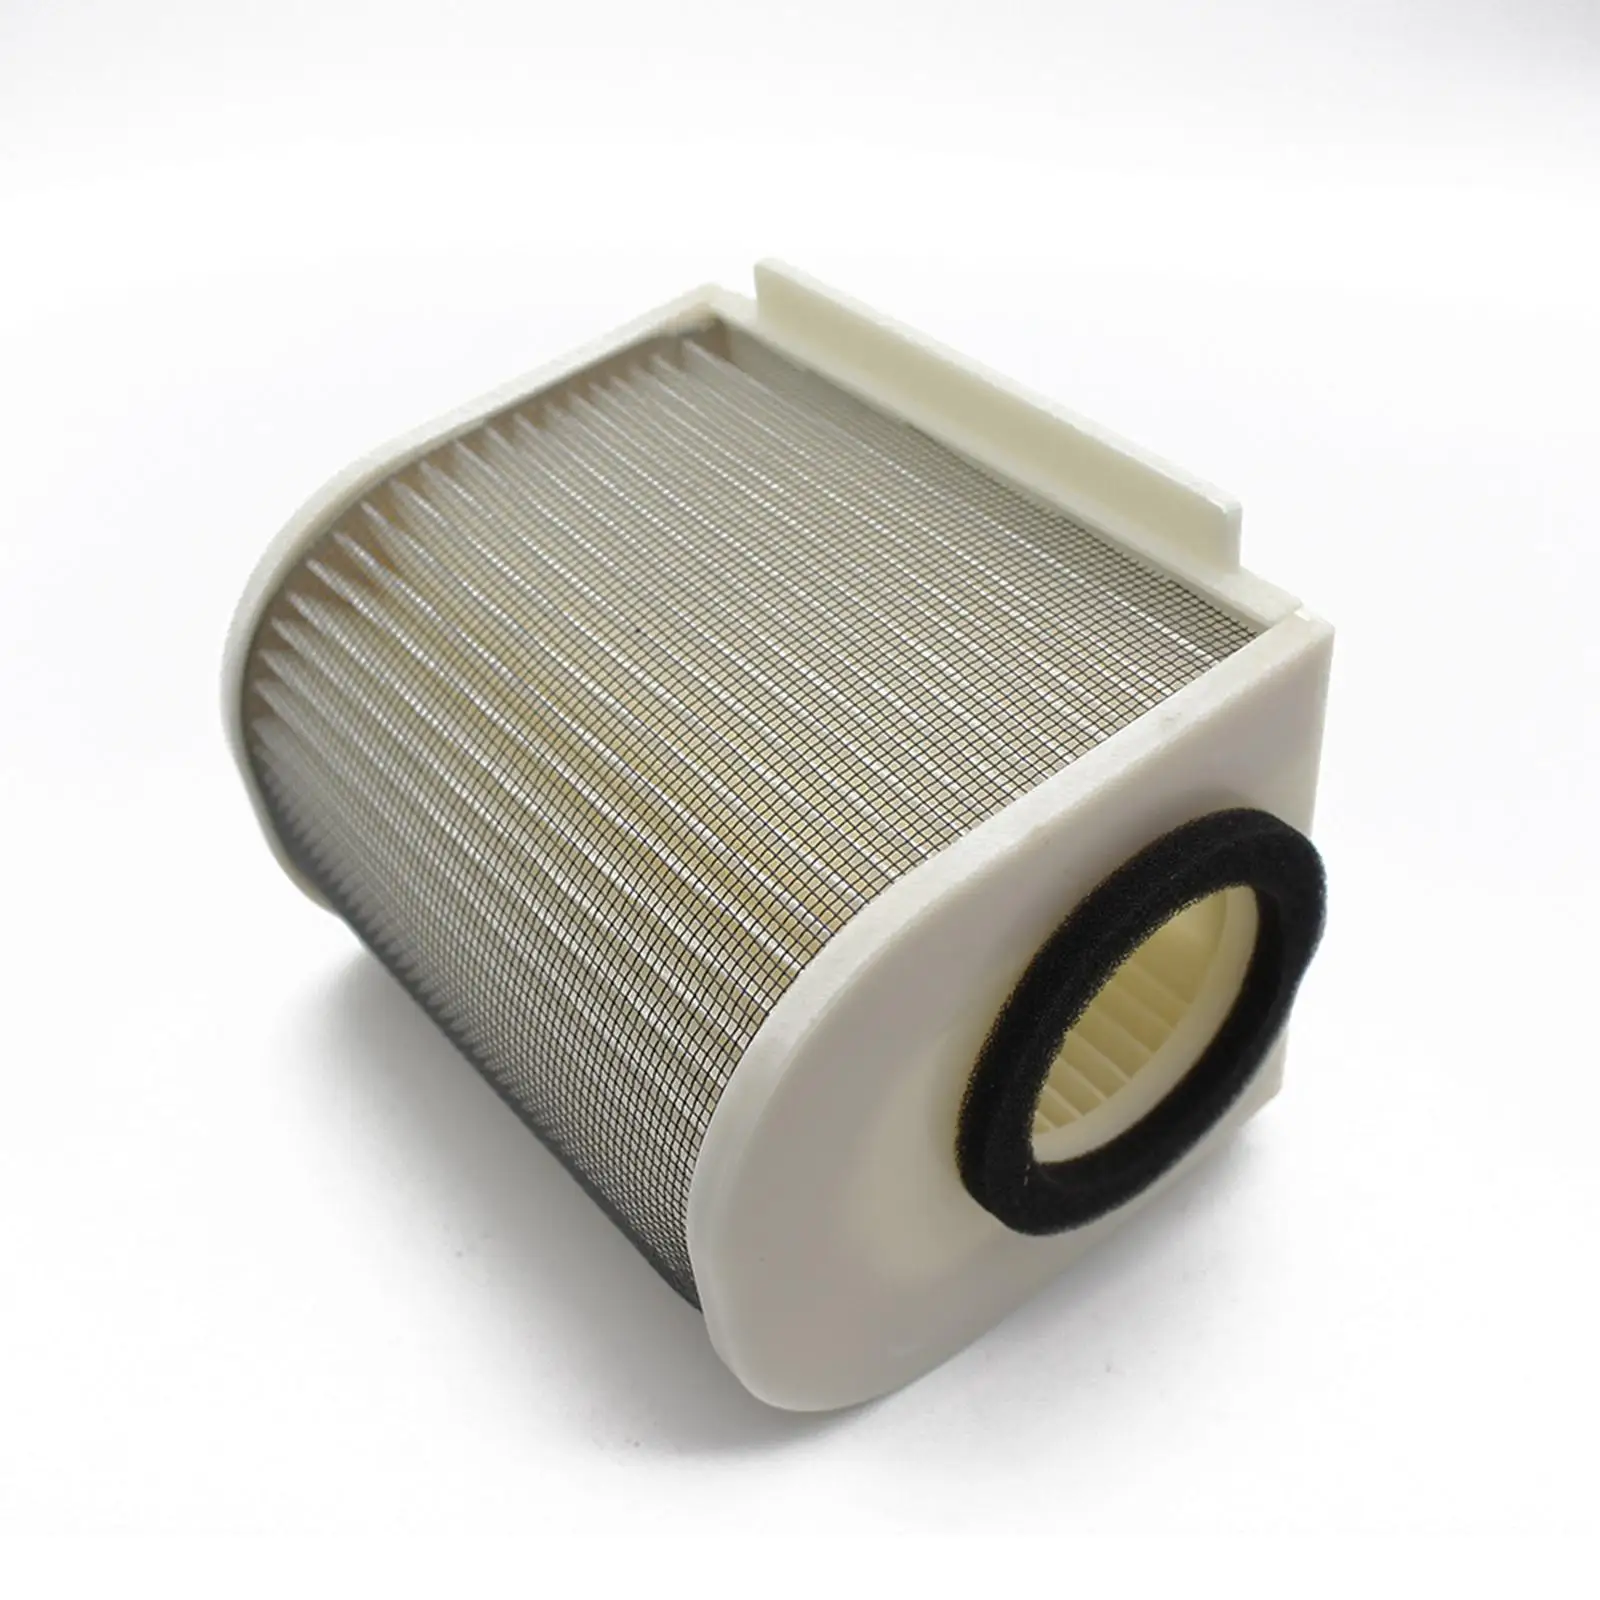 Motorcycle Air Filter 4kg-14451-00 for Yamaha XJR1200 Replacement Spare Parts